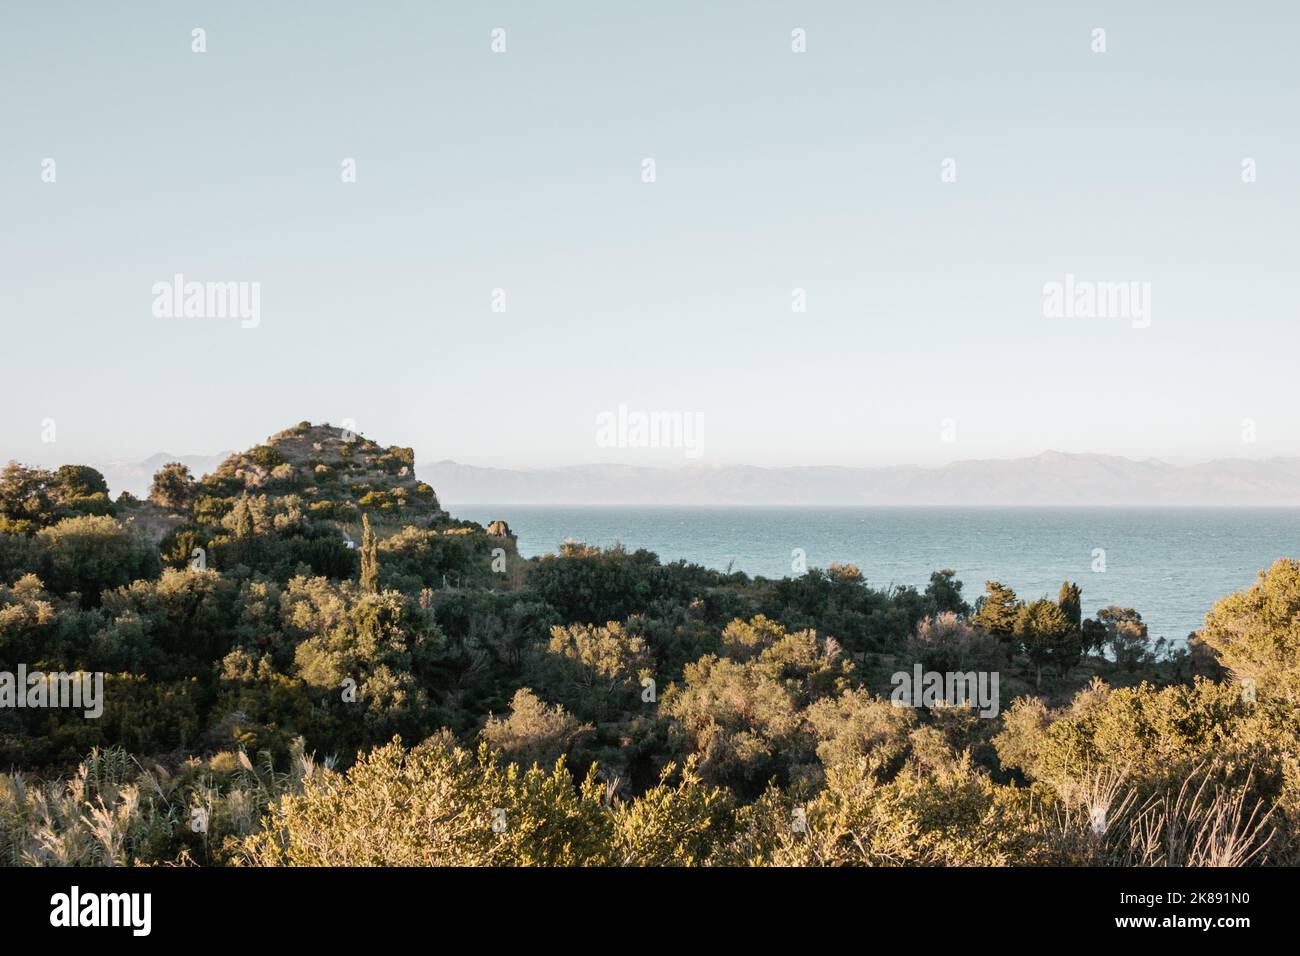 Beautiful view of the sea in Greece with mountains on the horizon and green bushes and mountains in the foreground. Stock Photo